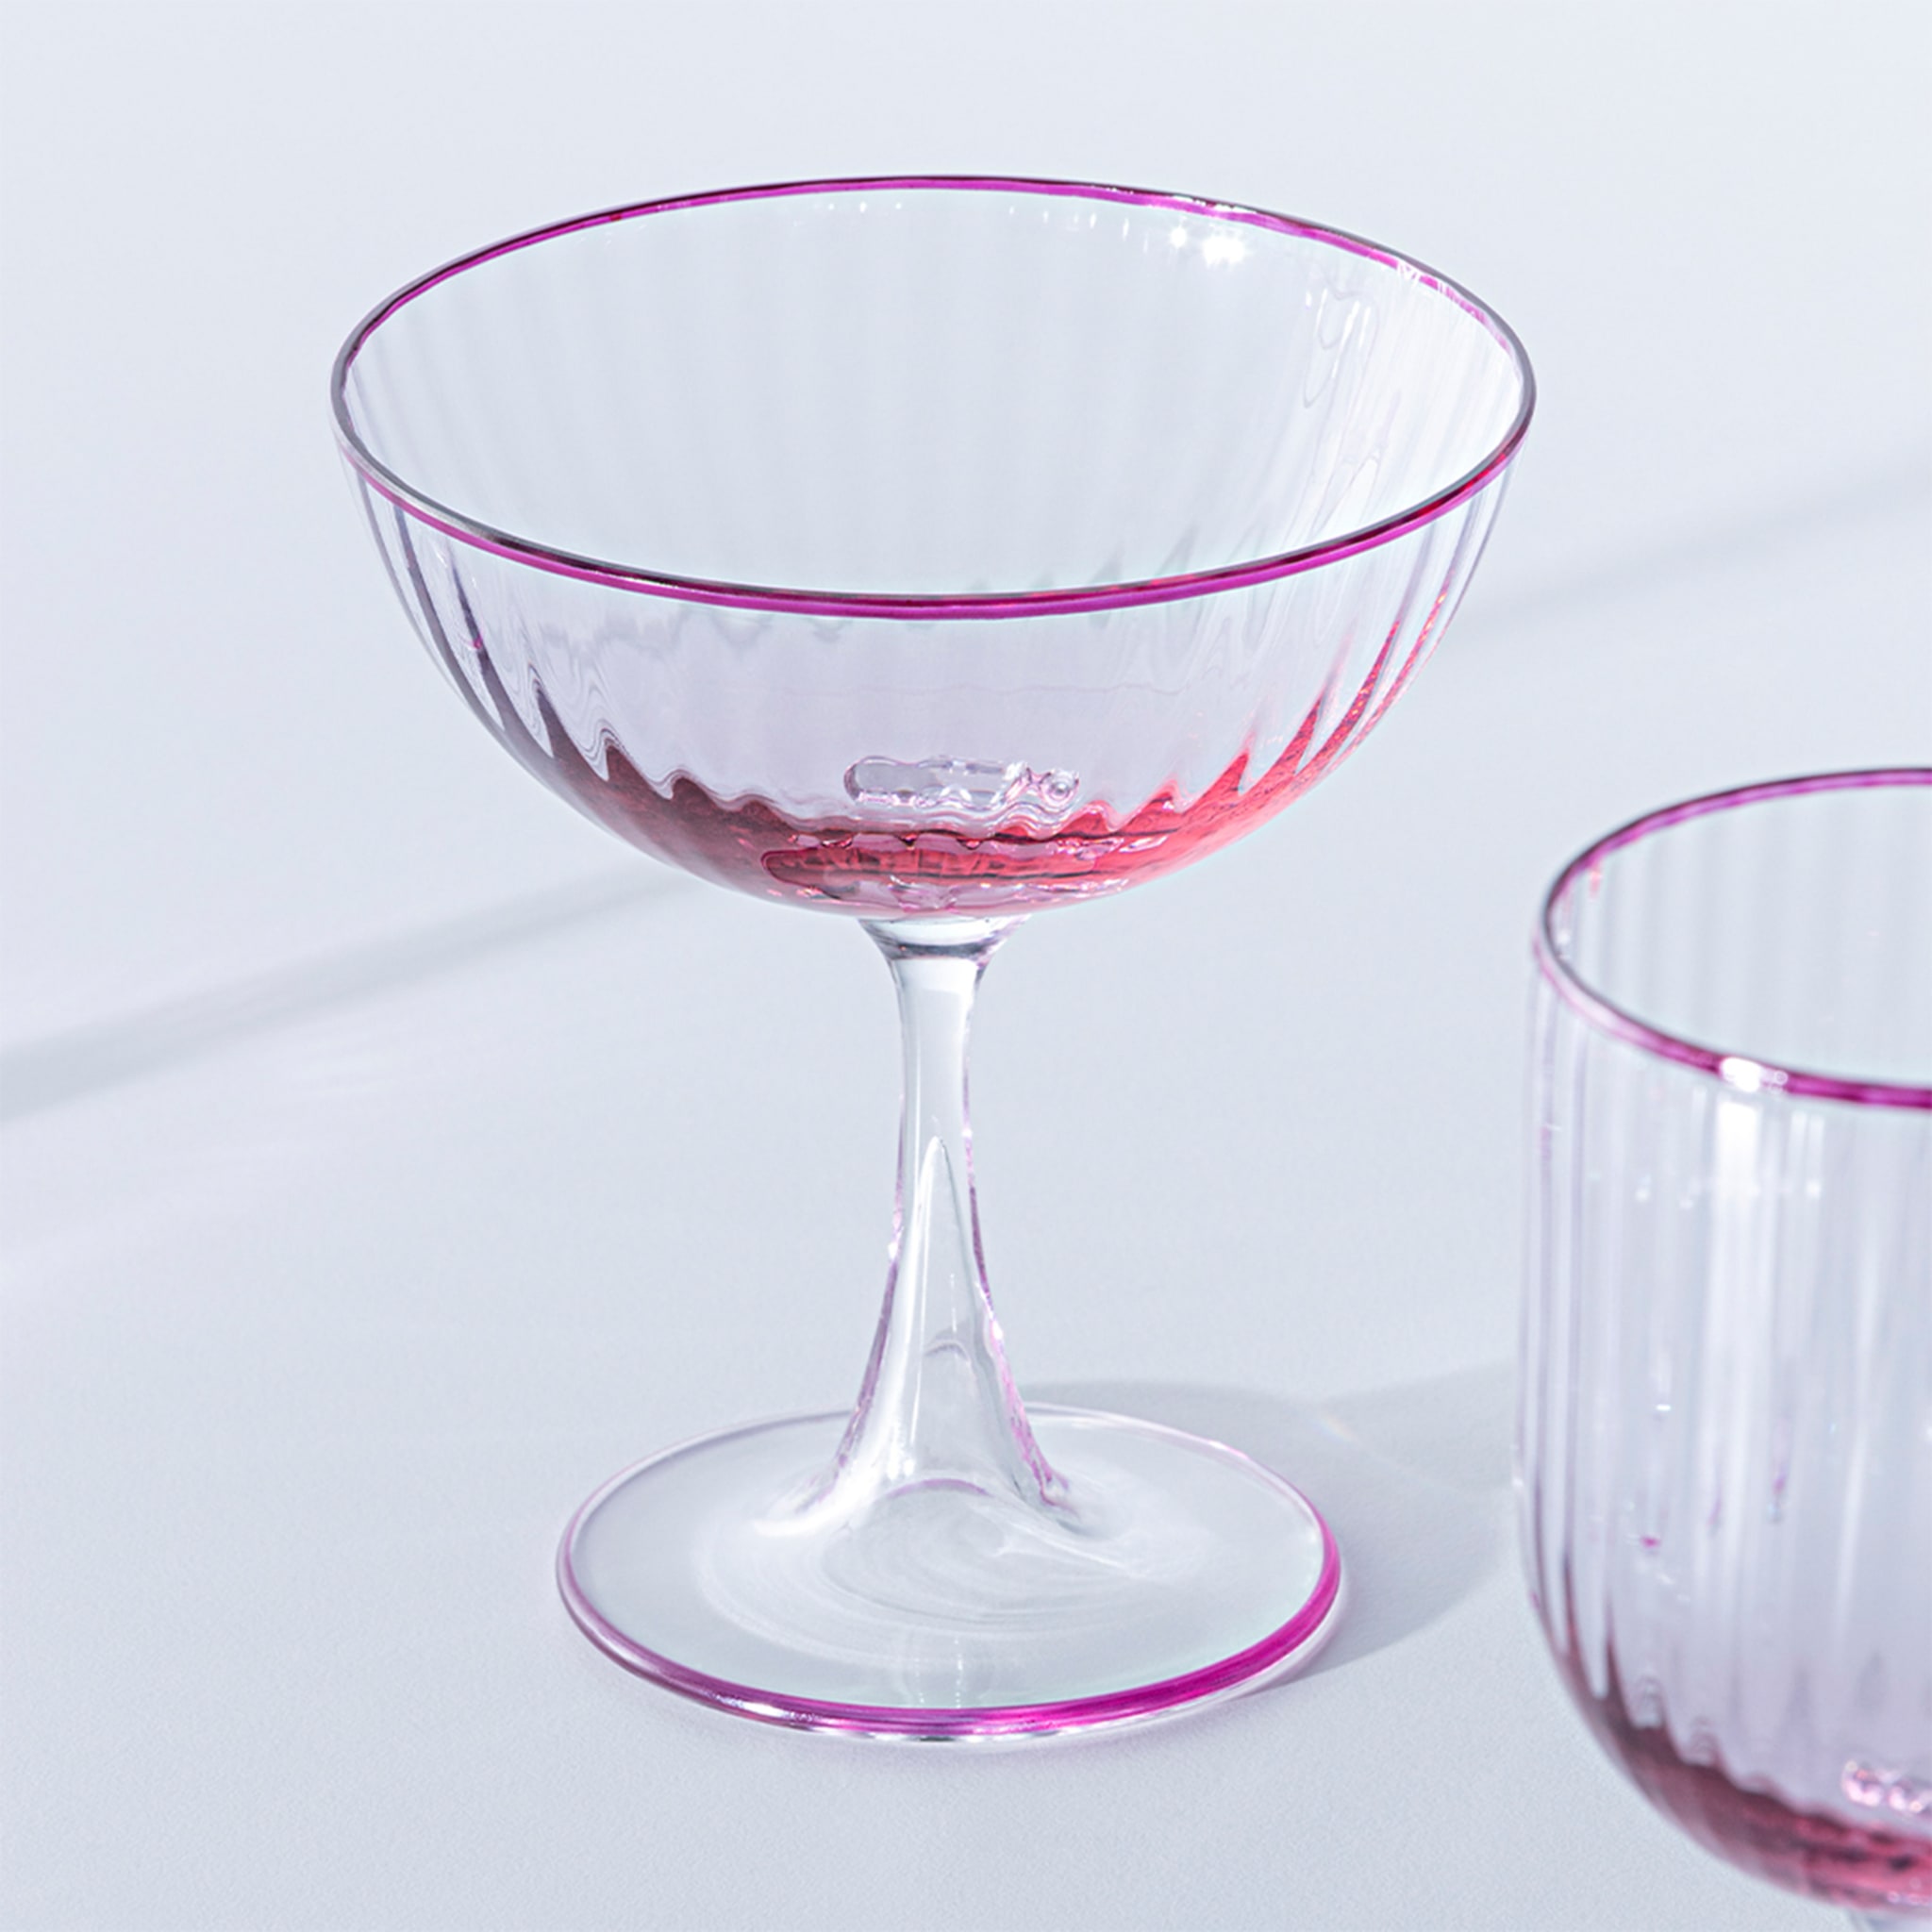 Set of 2 Mouth-Blown Amethyst & Rose Champagne Glasses - Alternative view 2